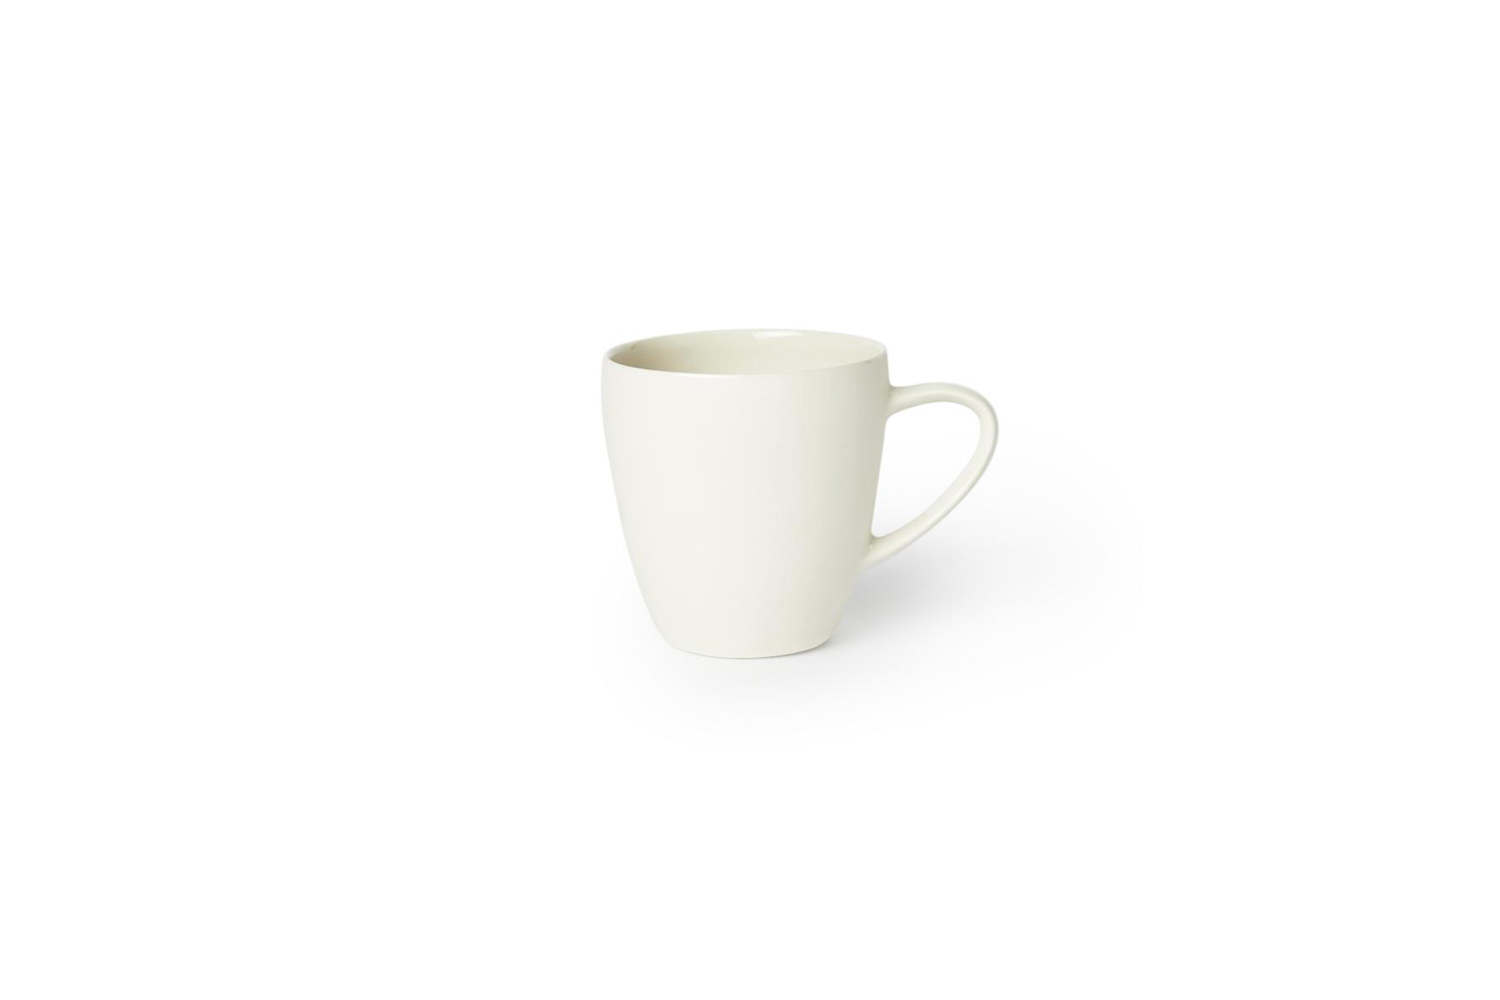 from mud australia, the mug with handle, shown in milk, is $64 aud at mud. 13